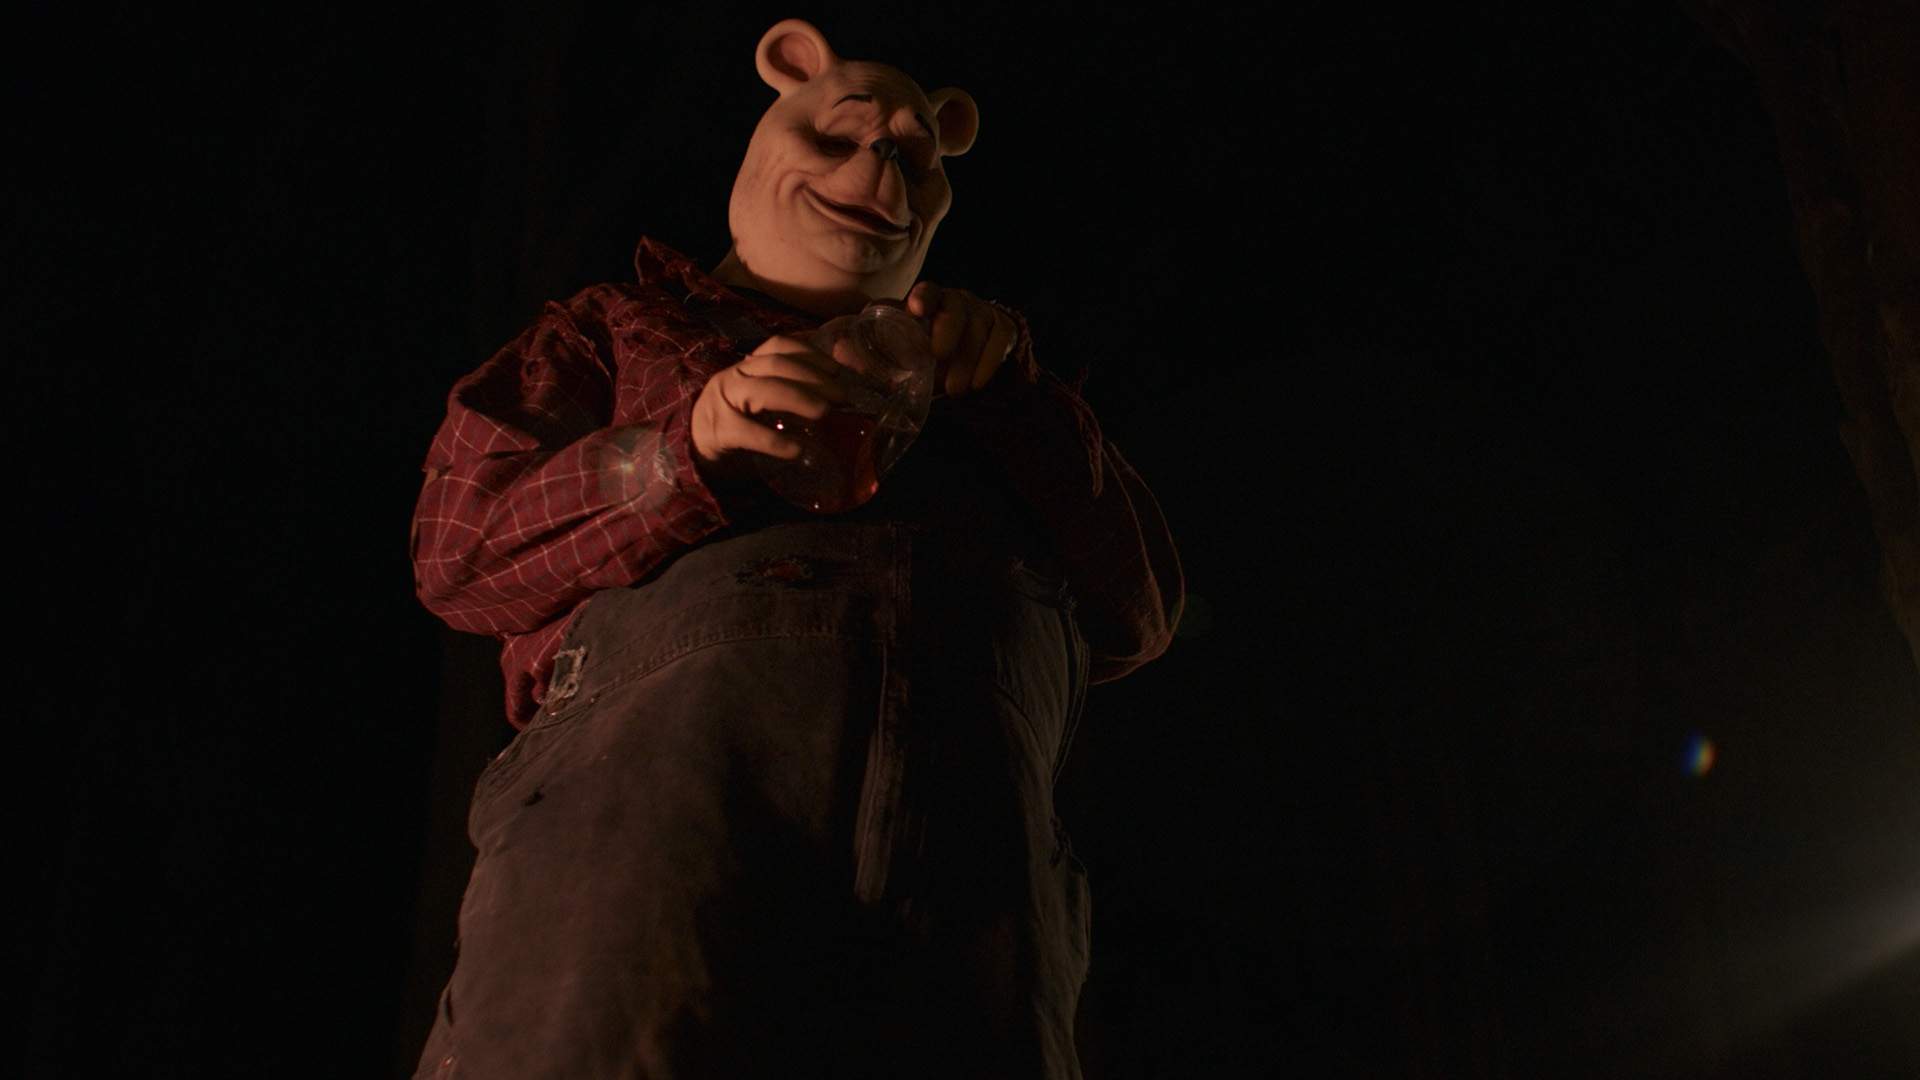 'Winnie-the-Pooh' Slasher Flick 'Blood and Honey' Just Dropped Its Supremely Creepy First Trailer